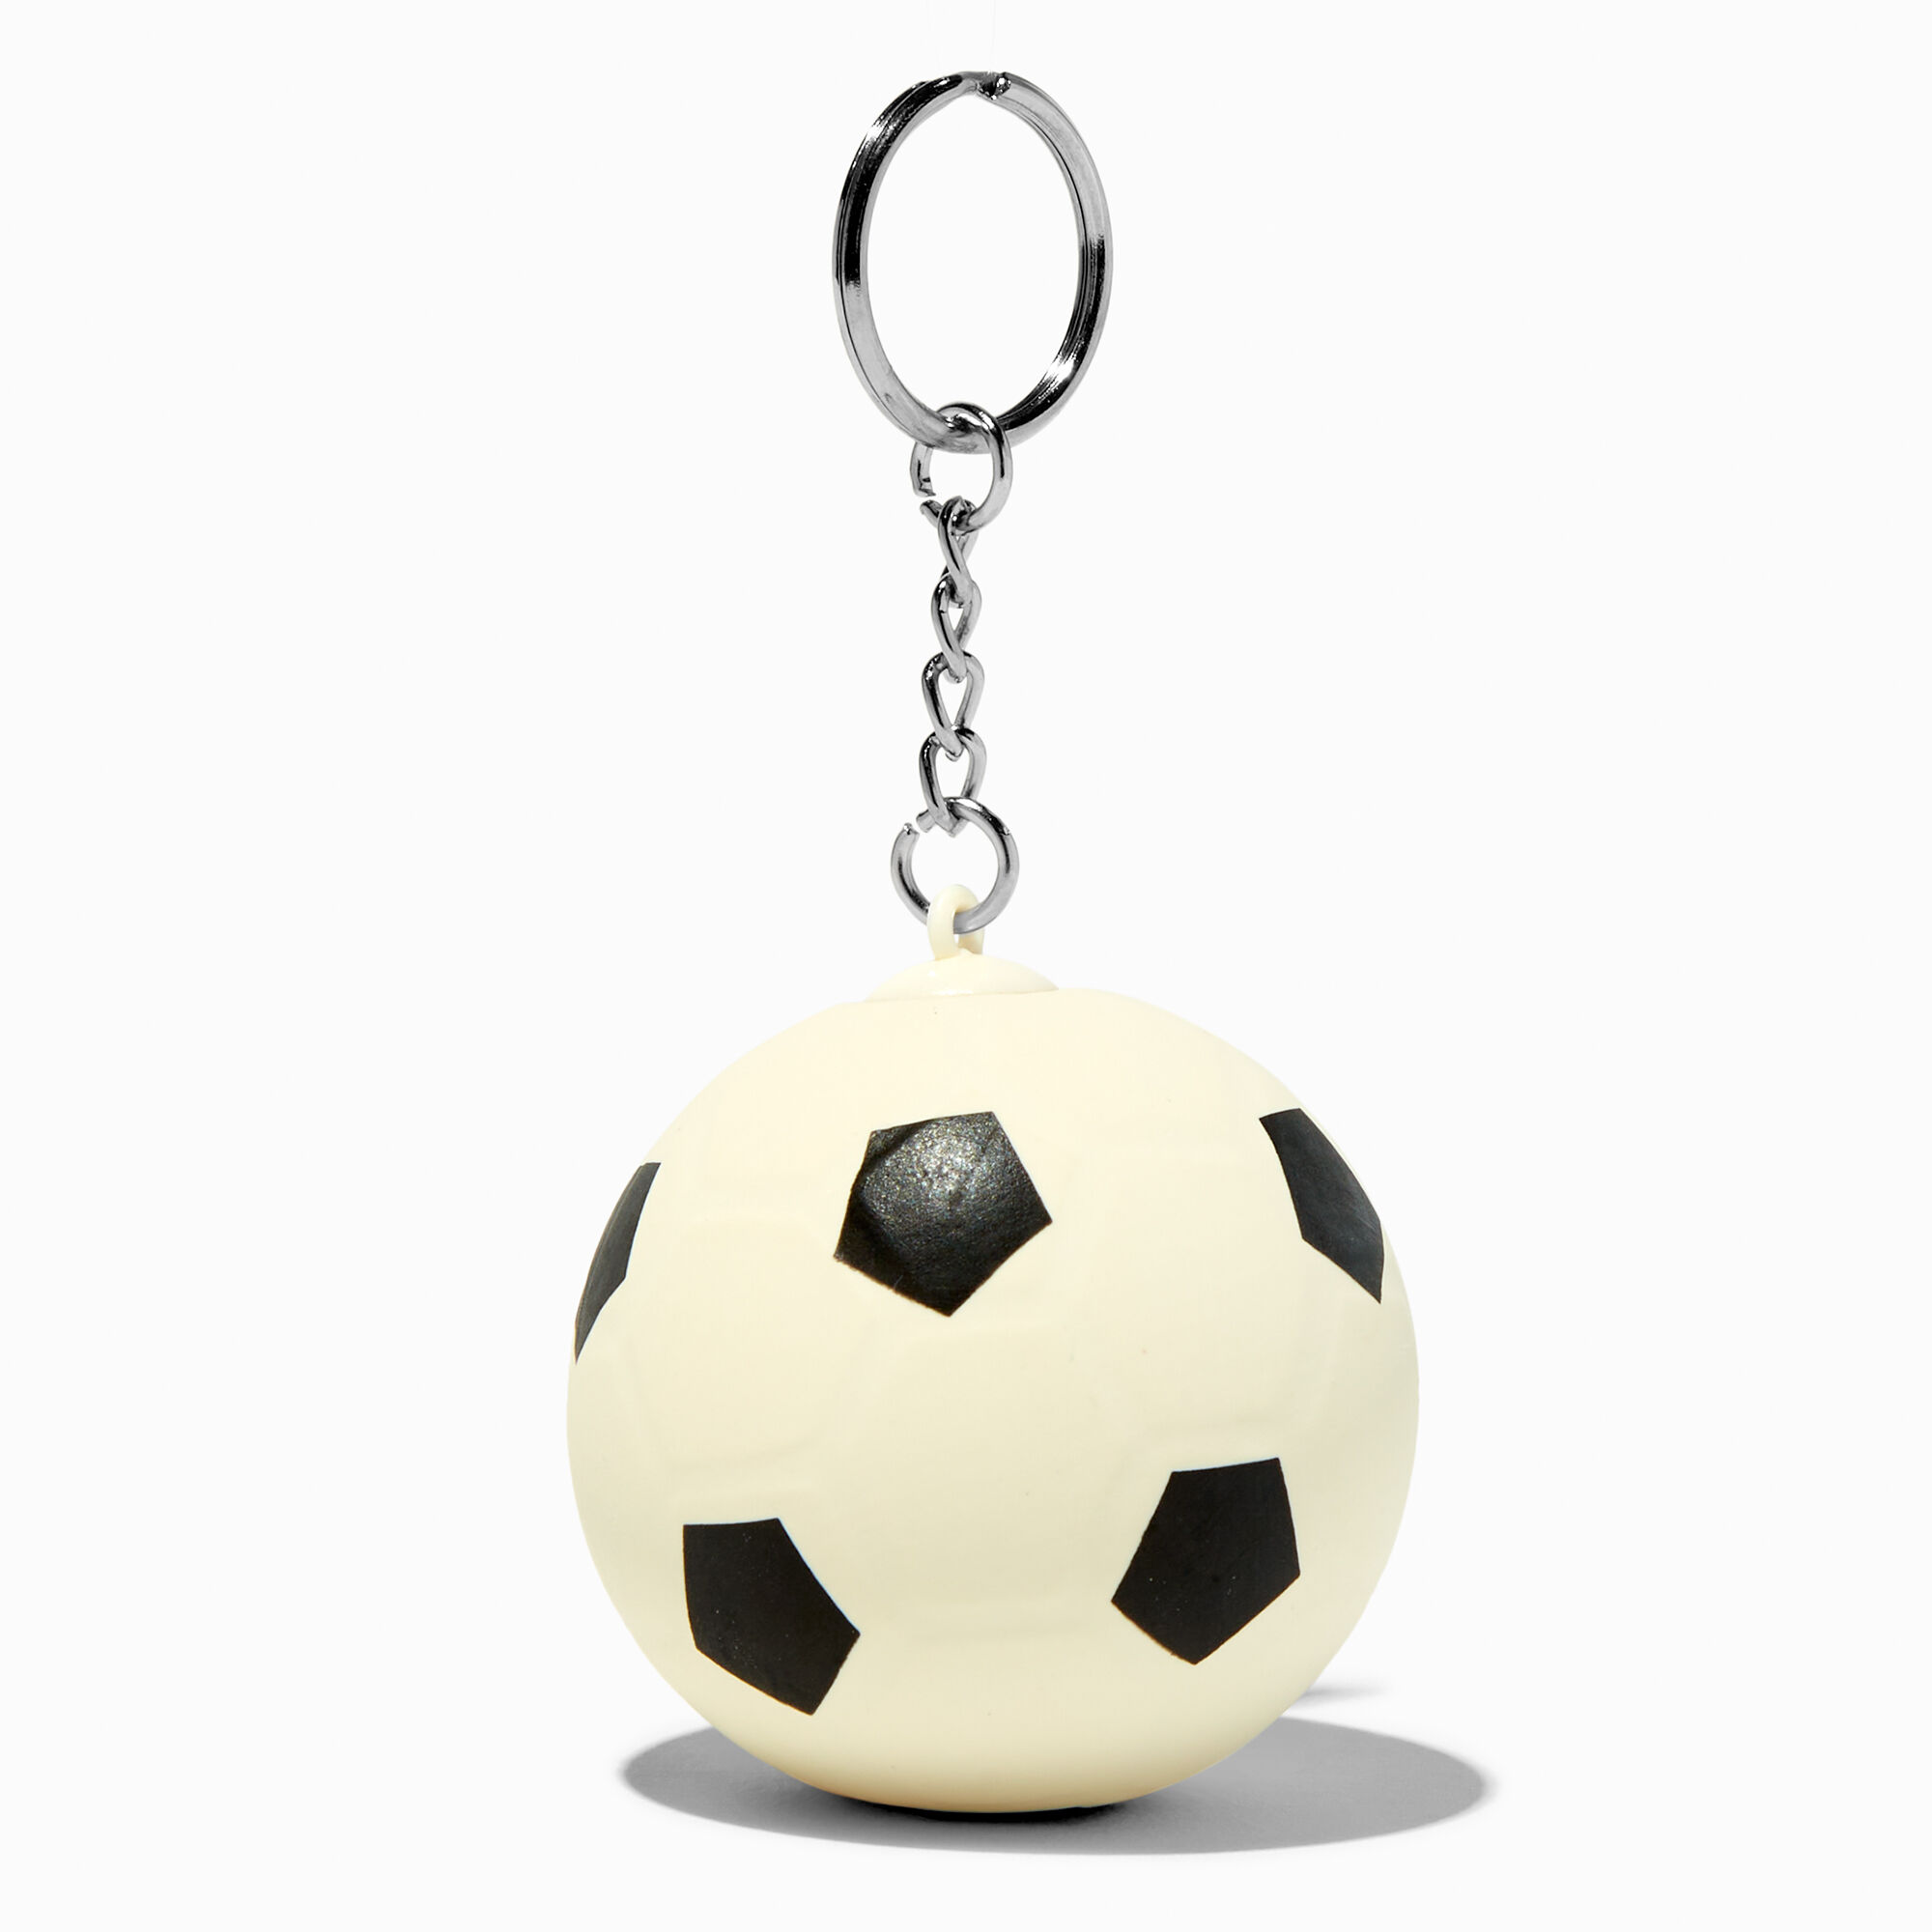 View Claires Soccer Ball Stress Keyring information